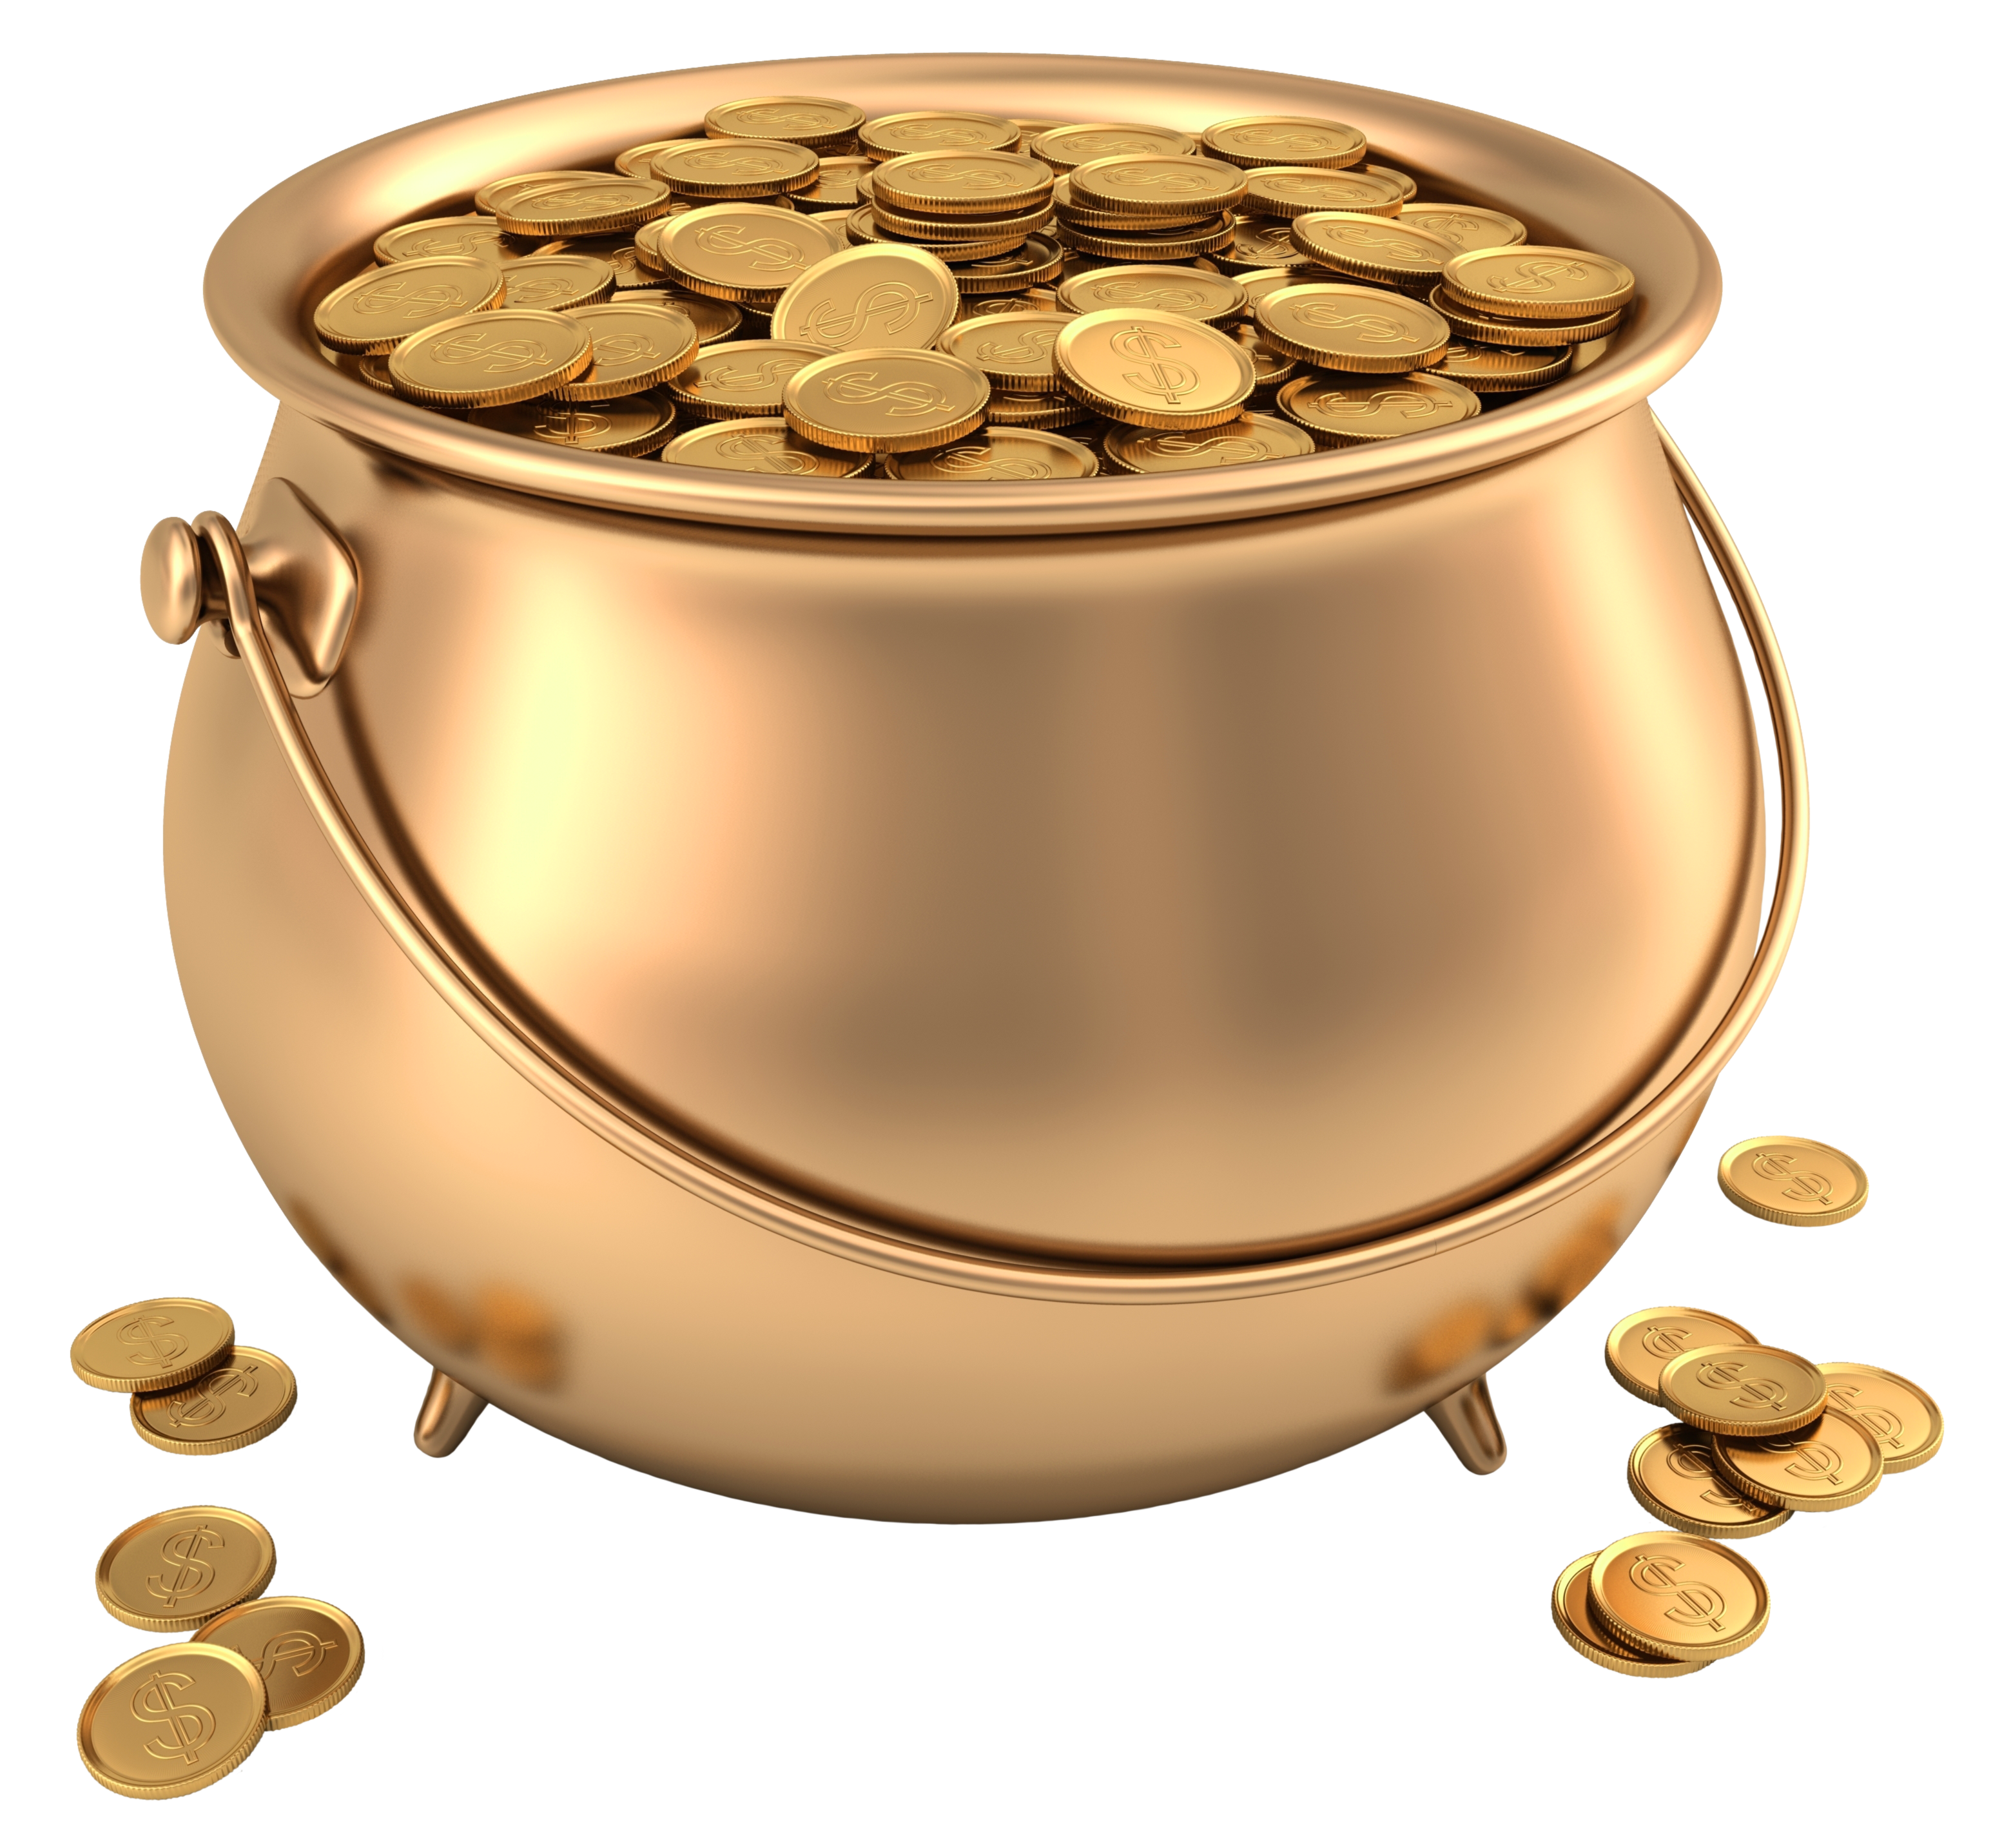 Pot of gold pictures free download clip art on